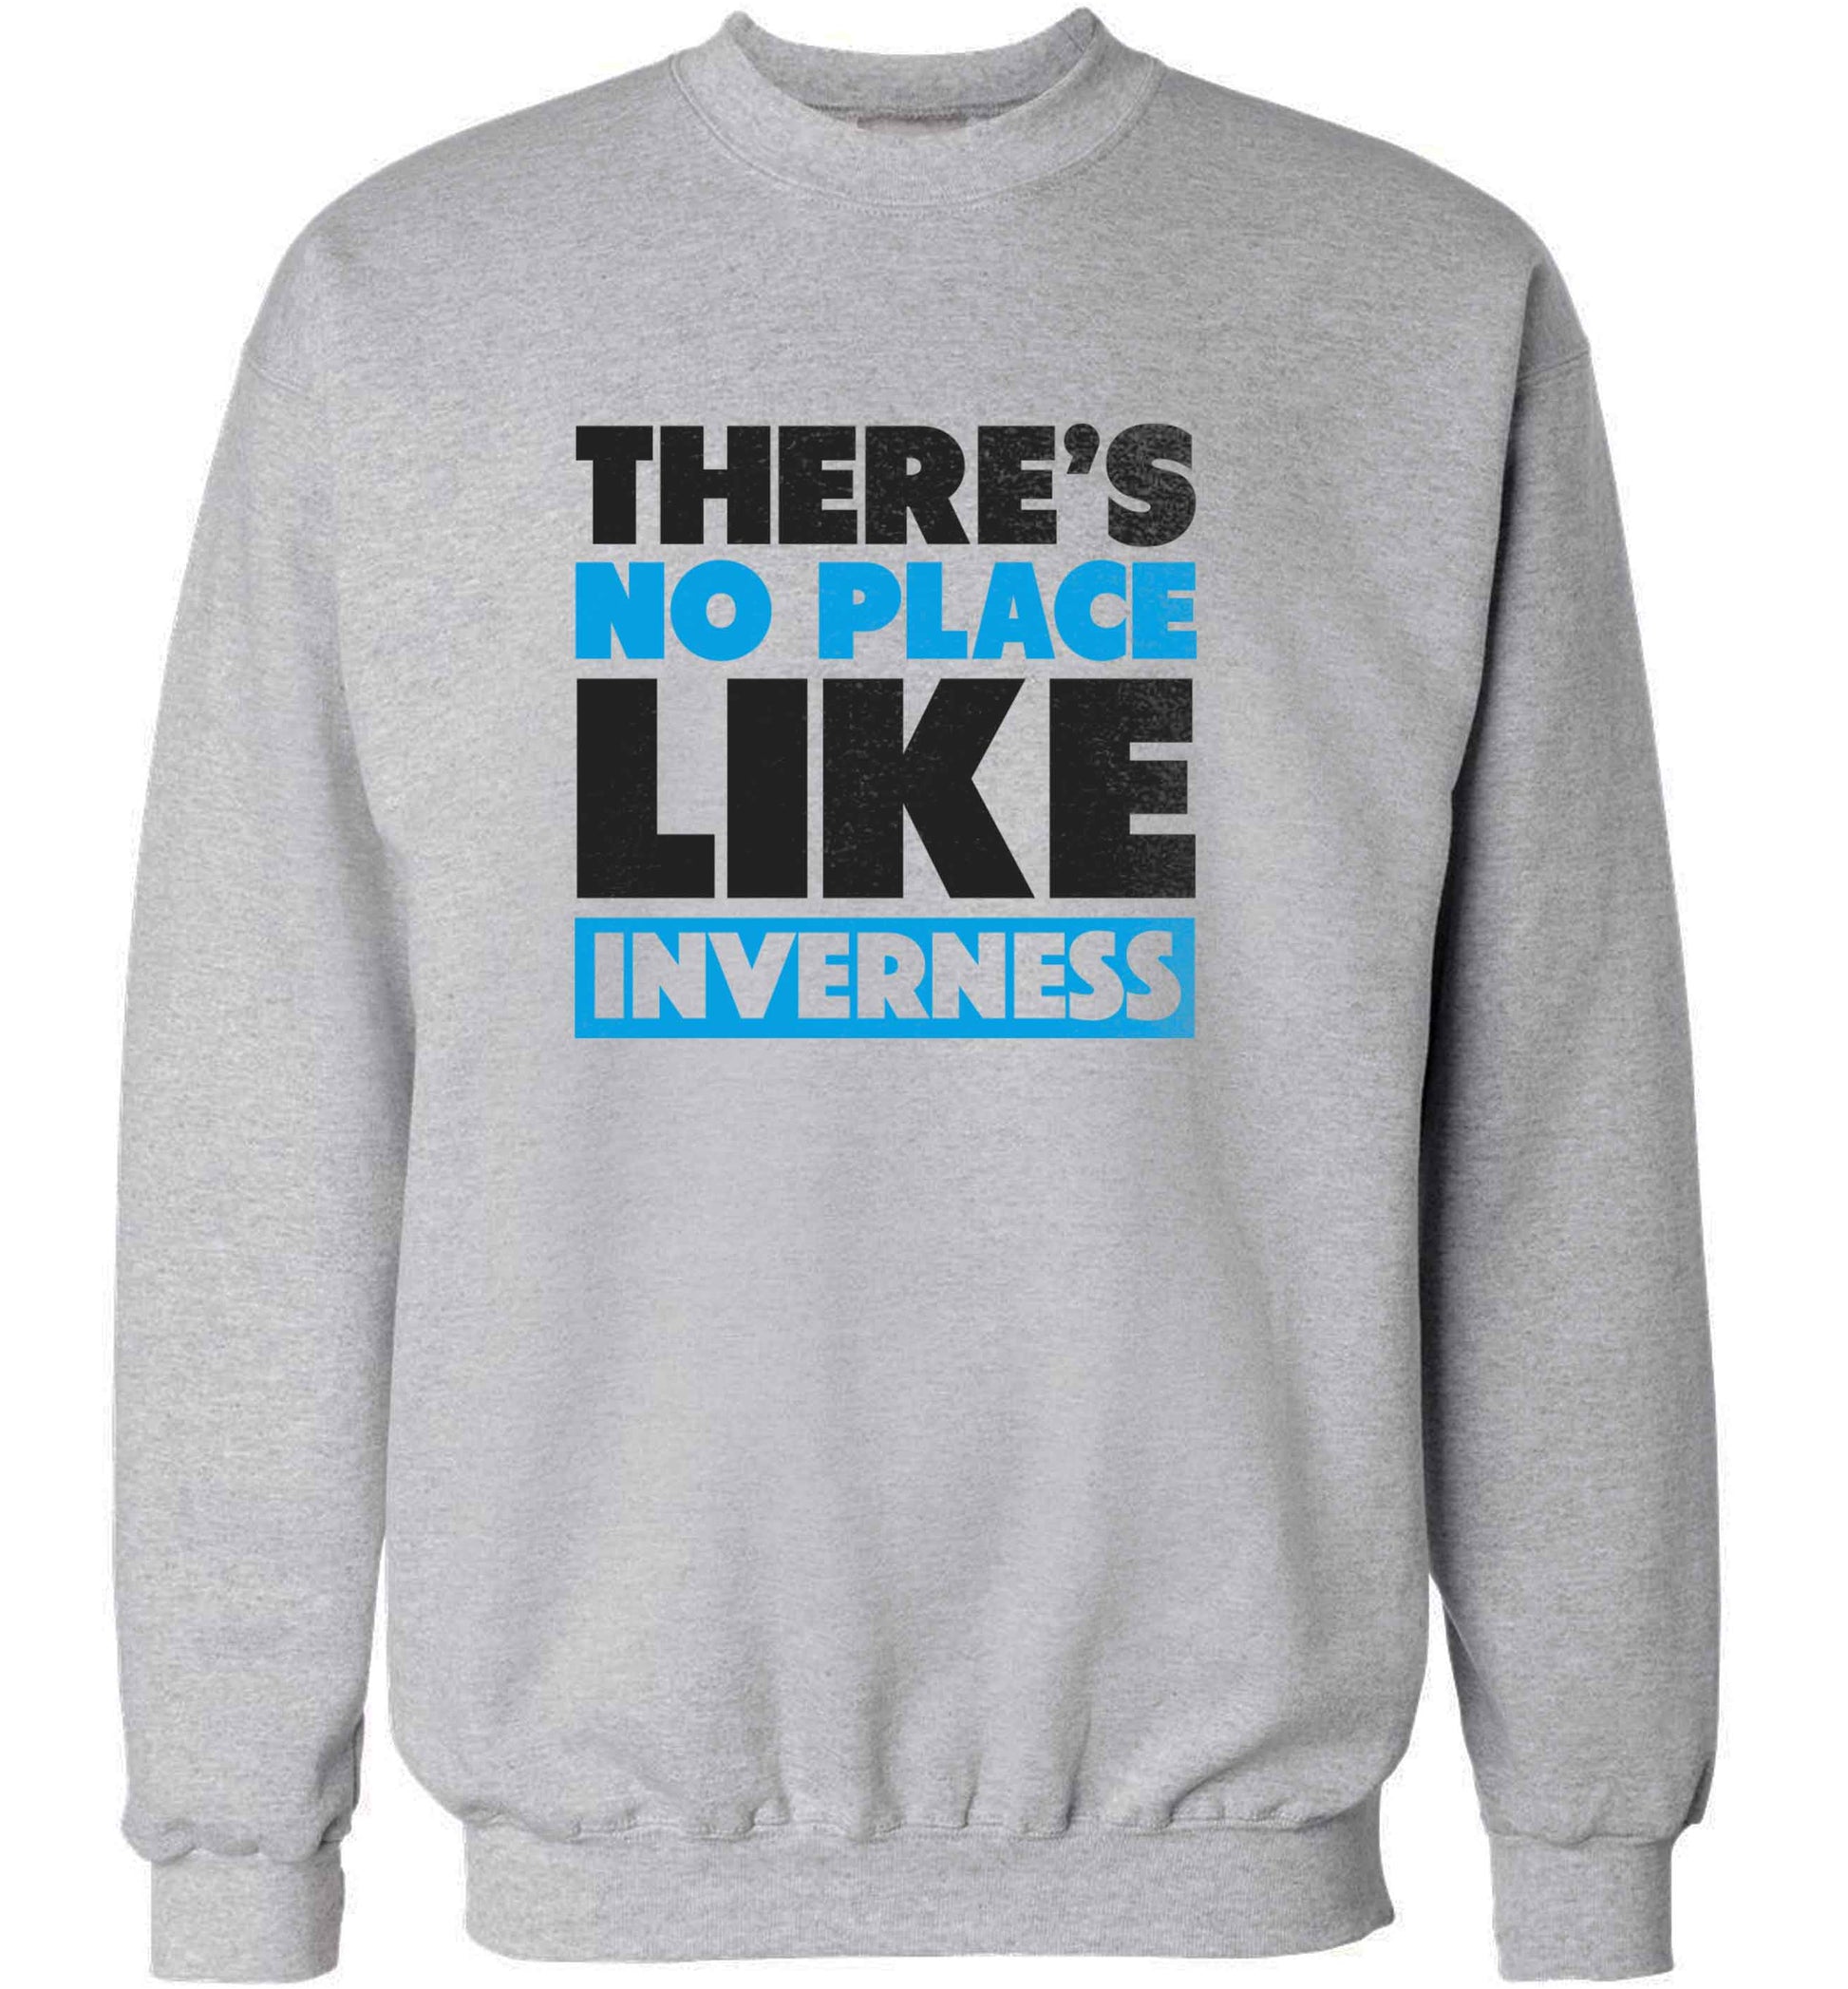 There's no place like Inverness adult's unisex grey sweater 2XL